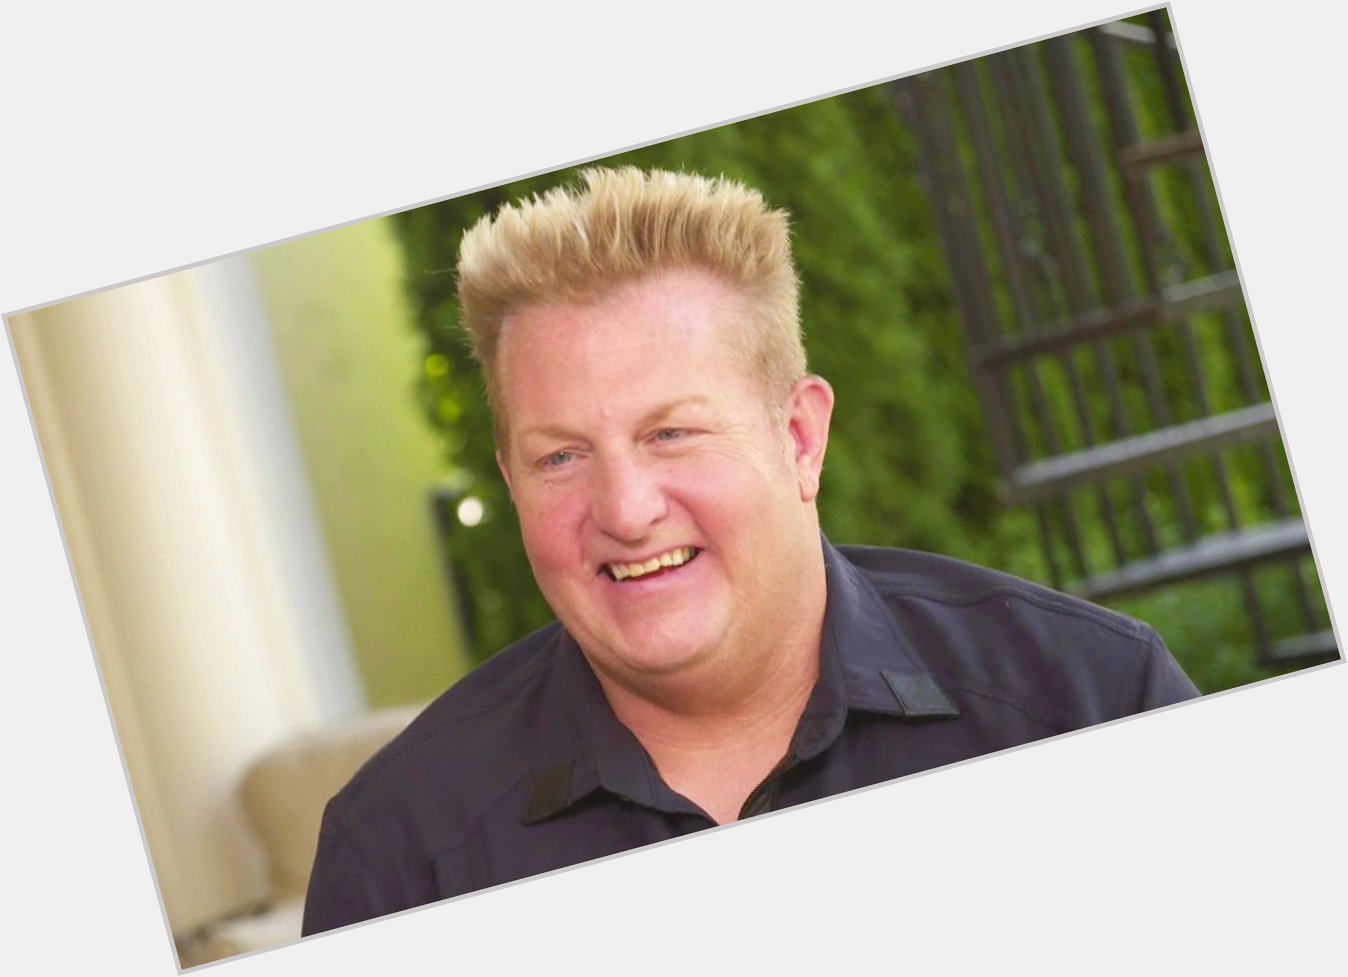 Happy birthday to Gary LeVox, the former lead singer for the ACM and CMA-winning band Rascal Flatts. 